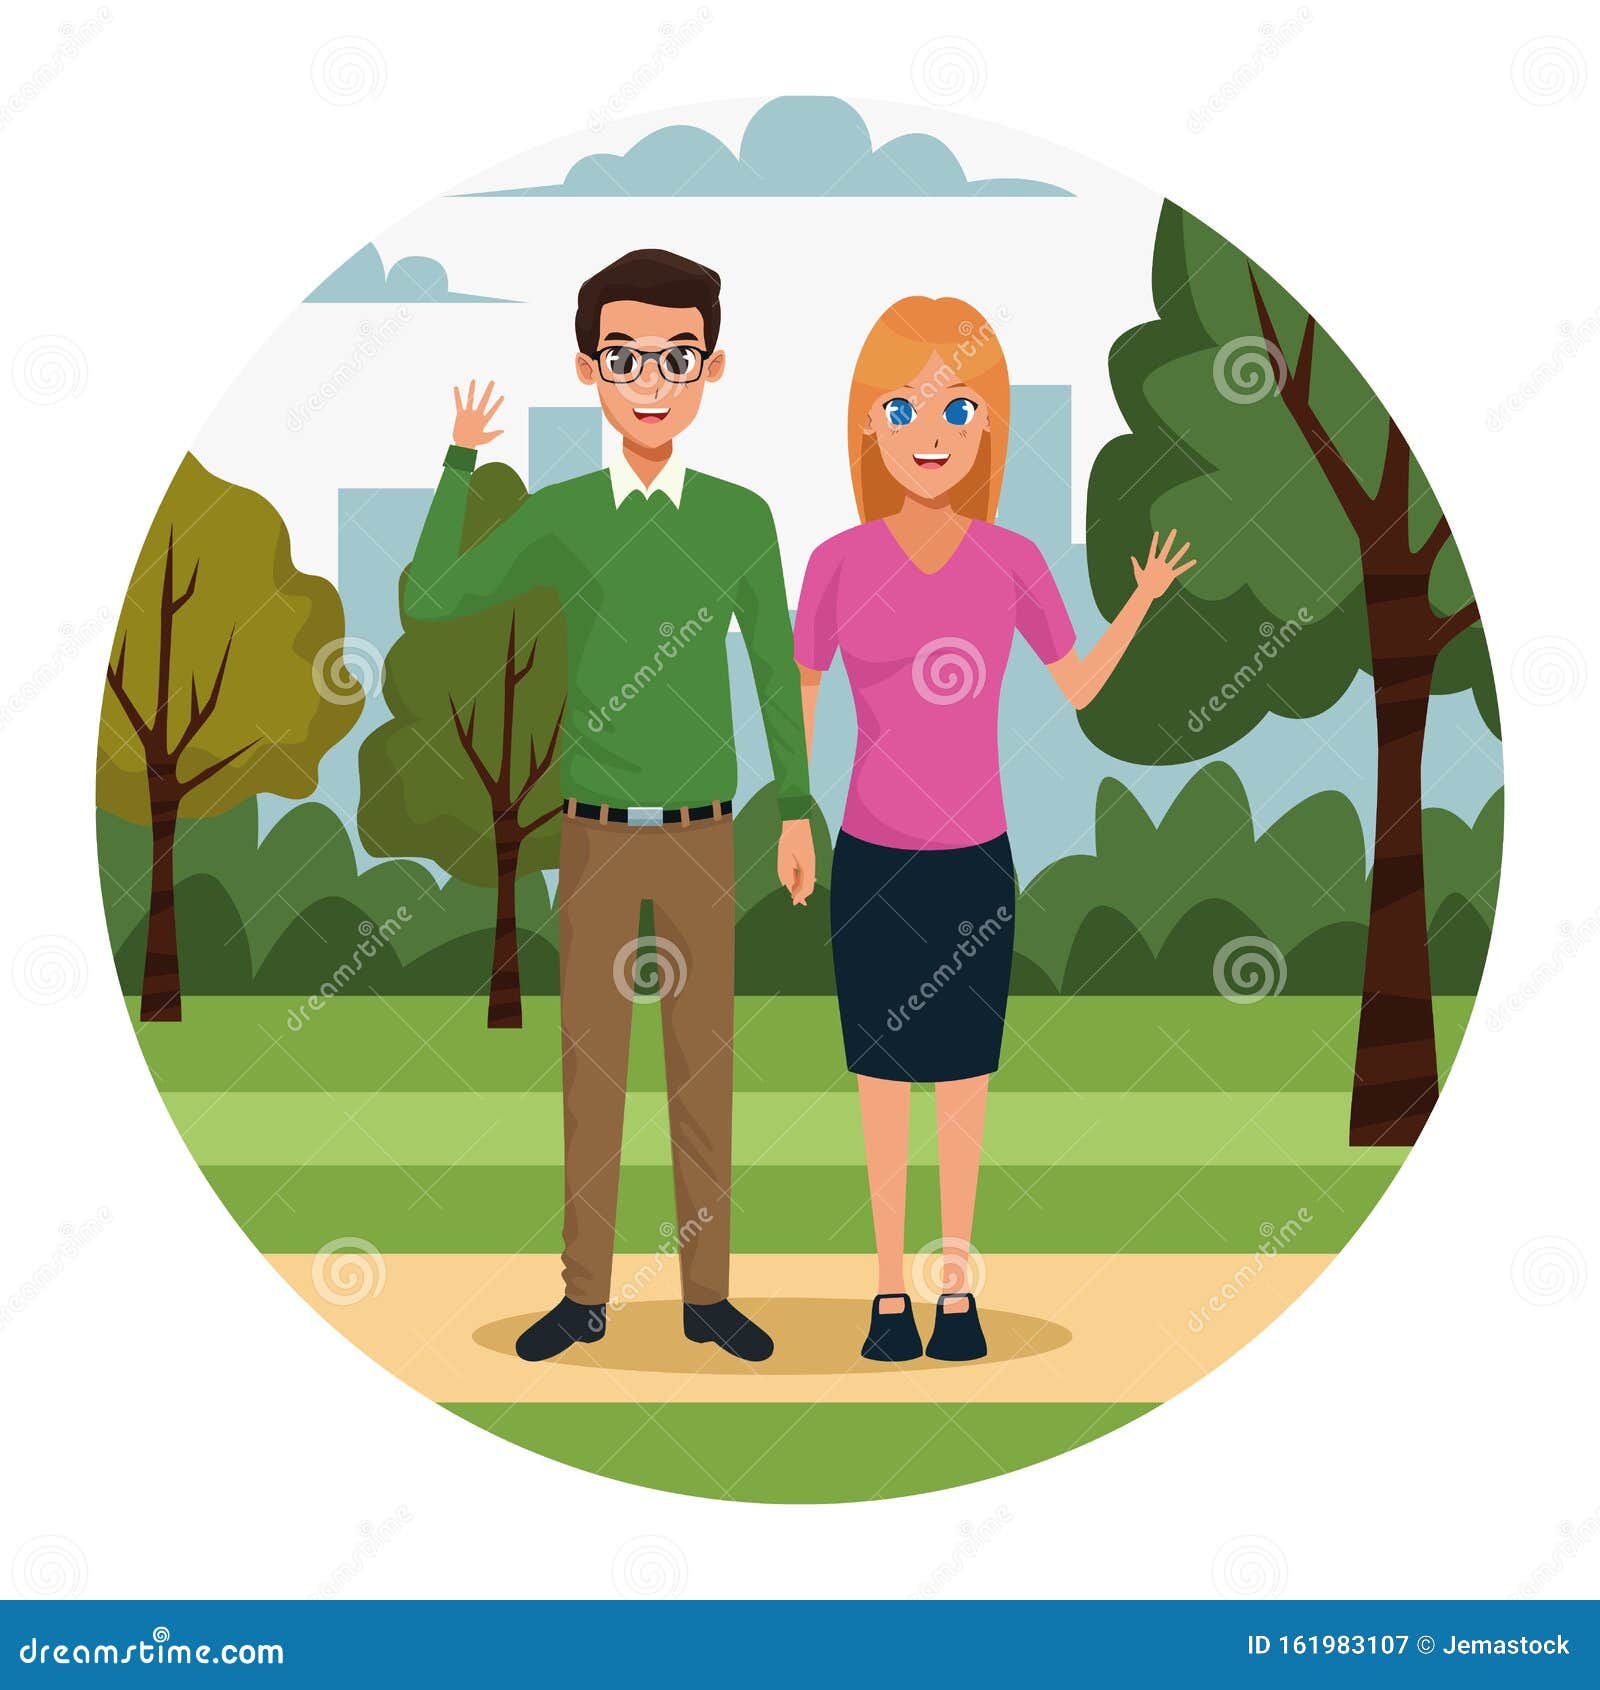 Cartoon Couple Waving in the Park Stock Vector - Illustration of mouth ...